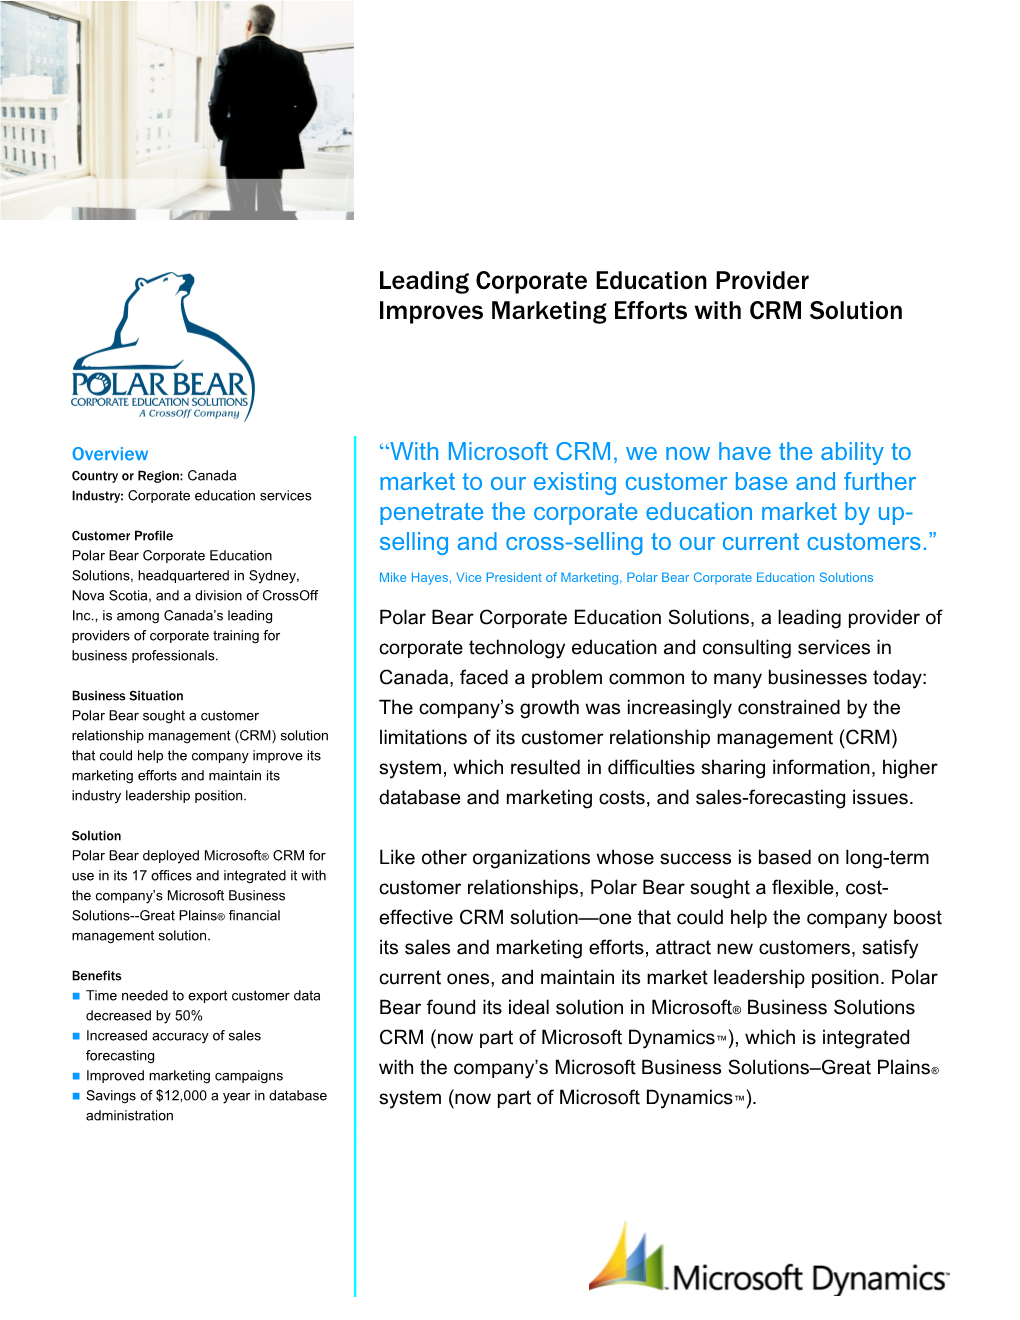 Leading Corporate Education Provider Improves Marketing Efforts with CRM Solution